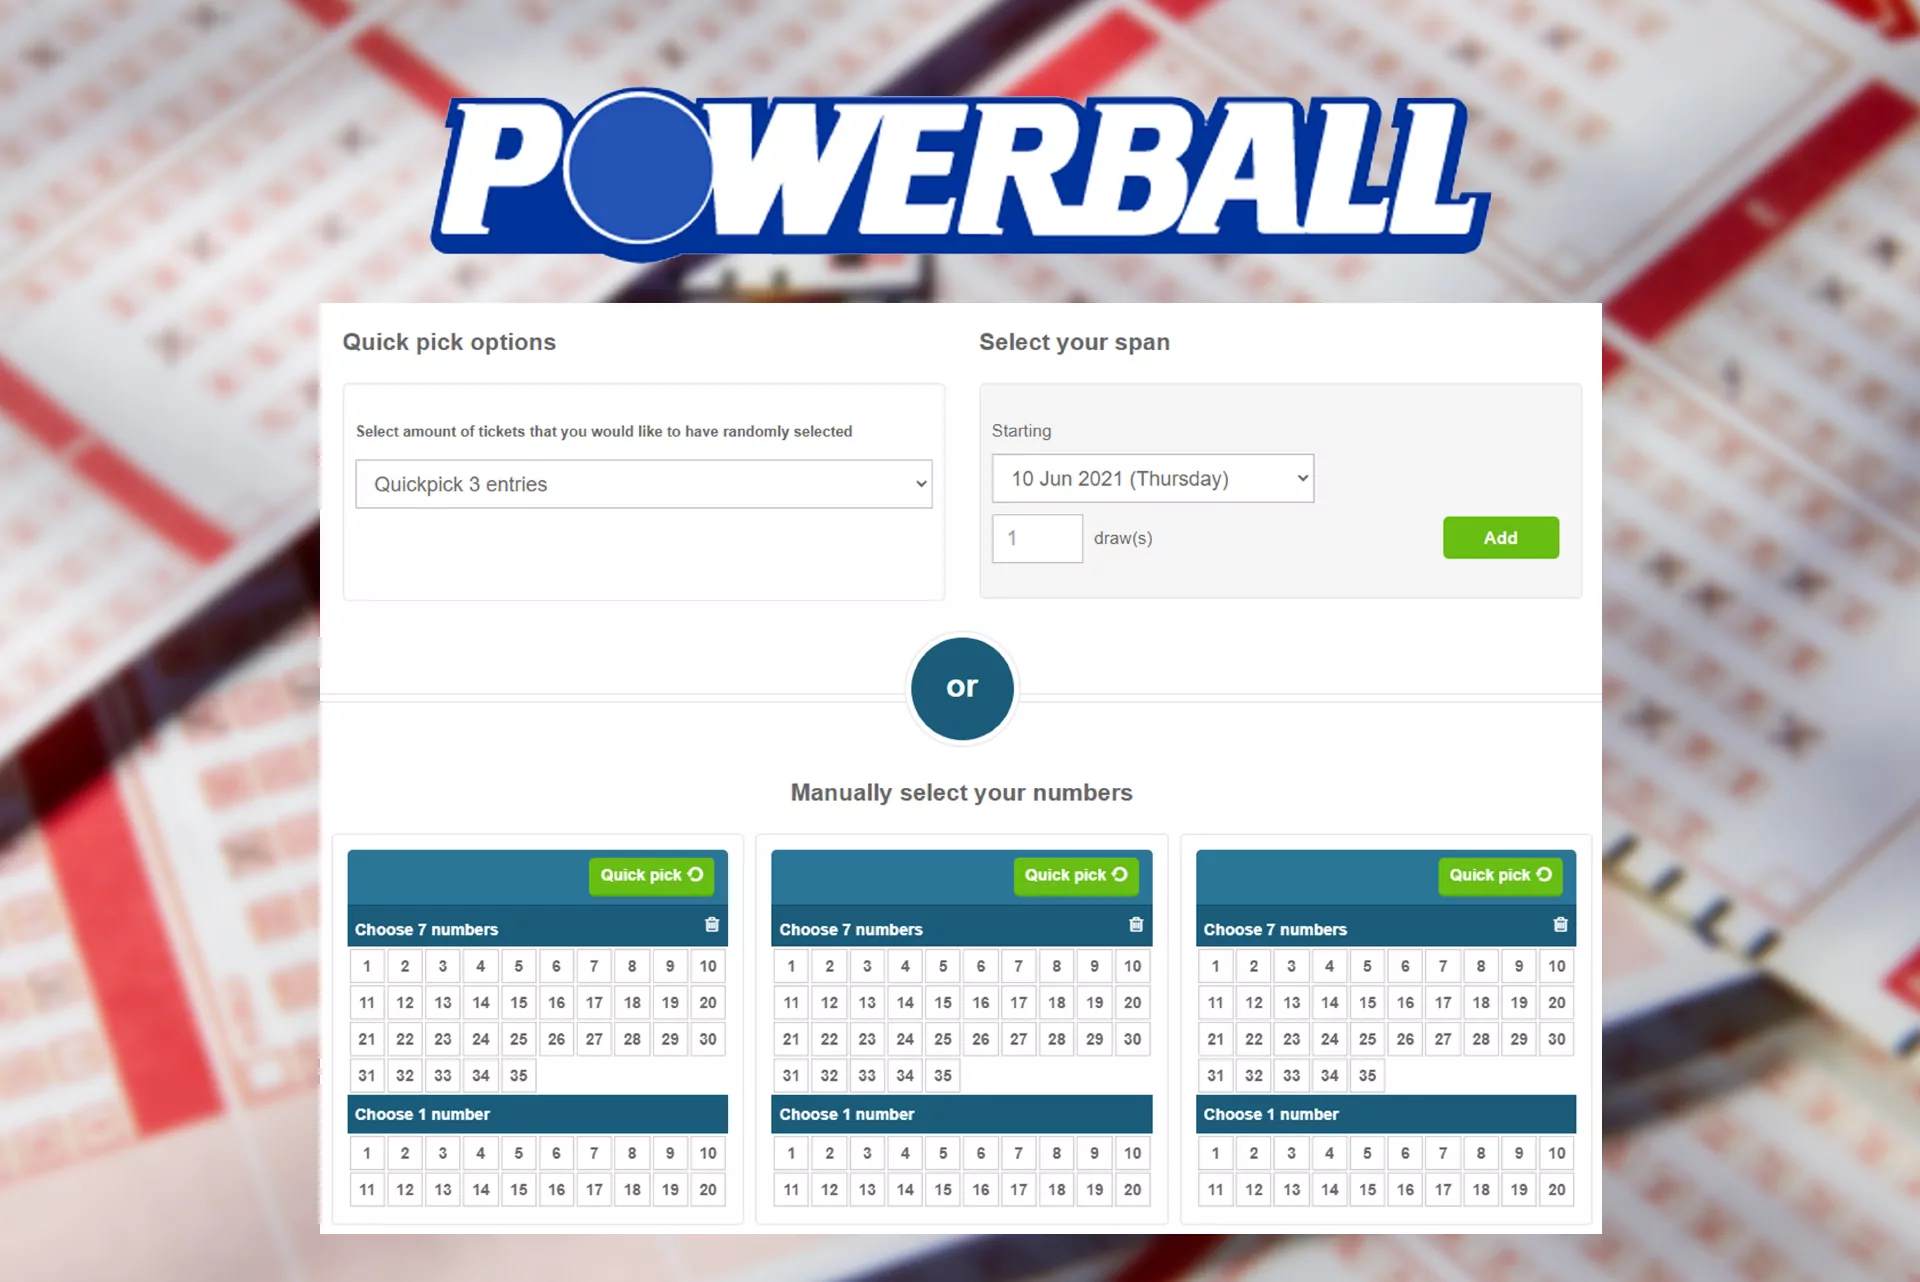 Oz Powerball is an Australian lottery with cheap tickets and a 3 million dollar jackpot.